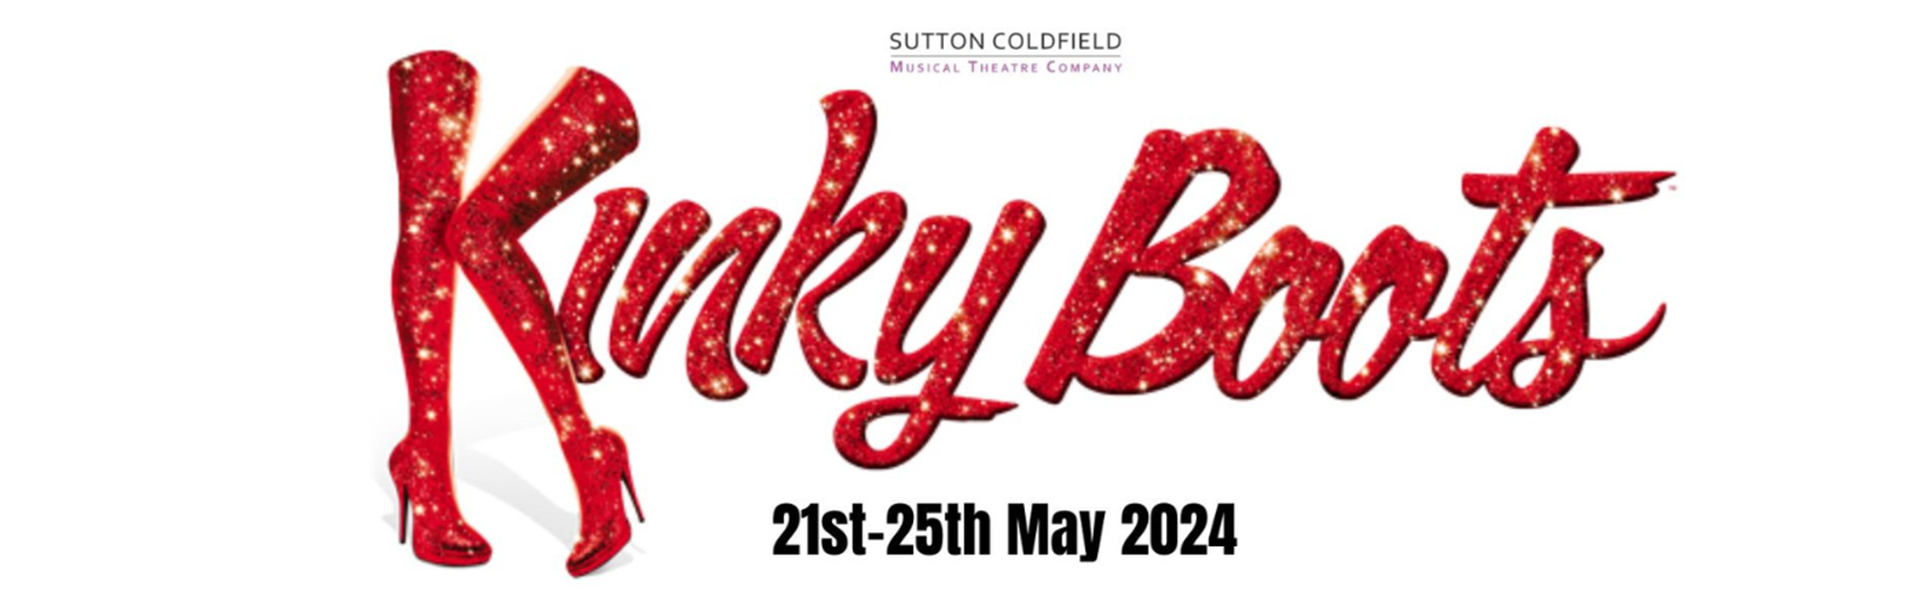 Kinky Boots - Sutton Coldfield Musical Theatre Company